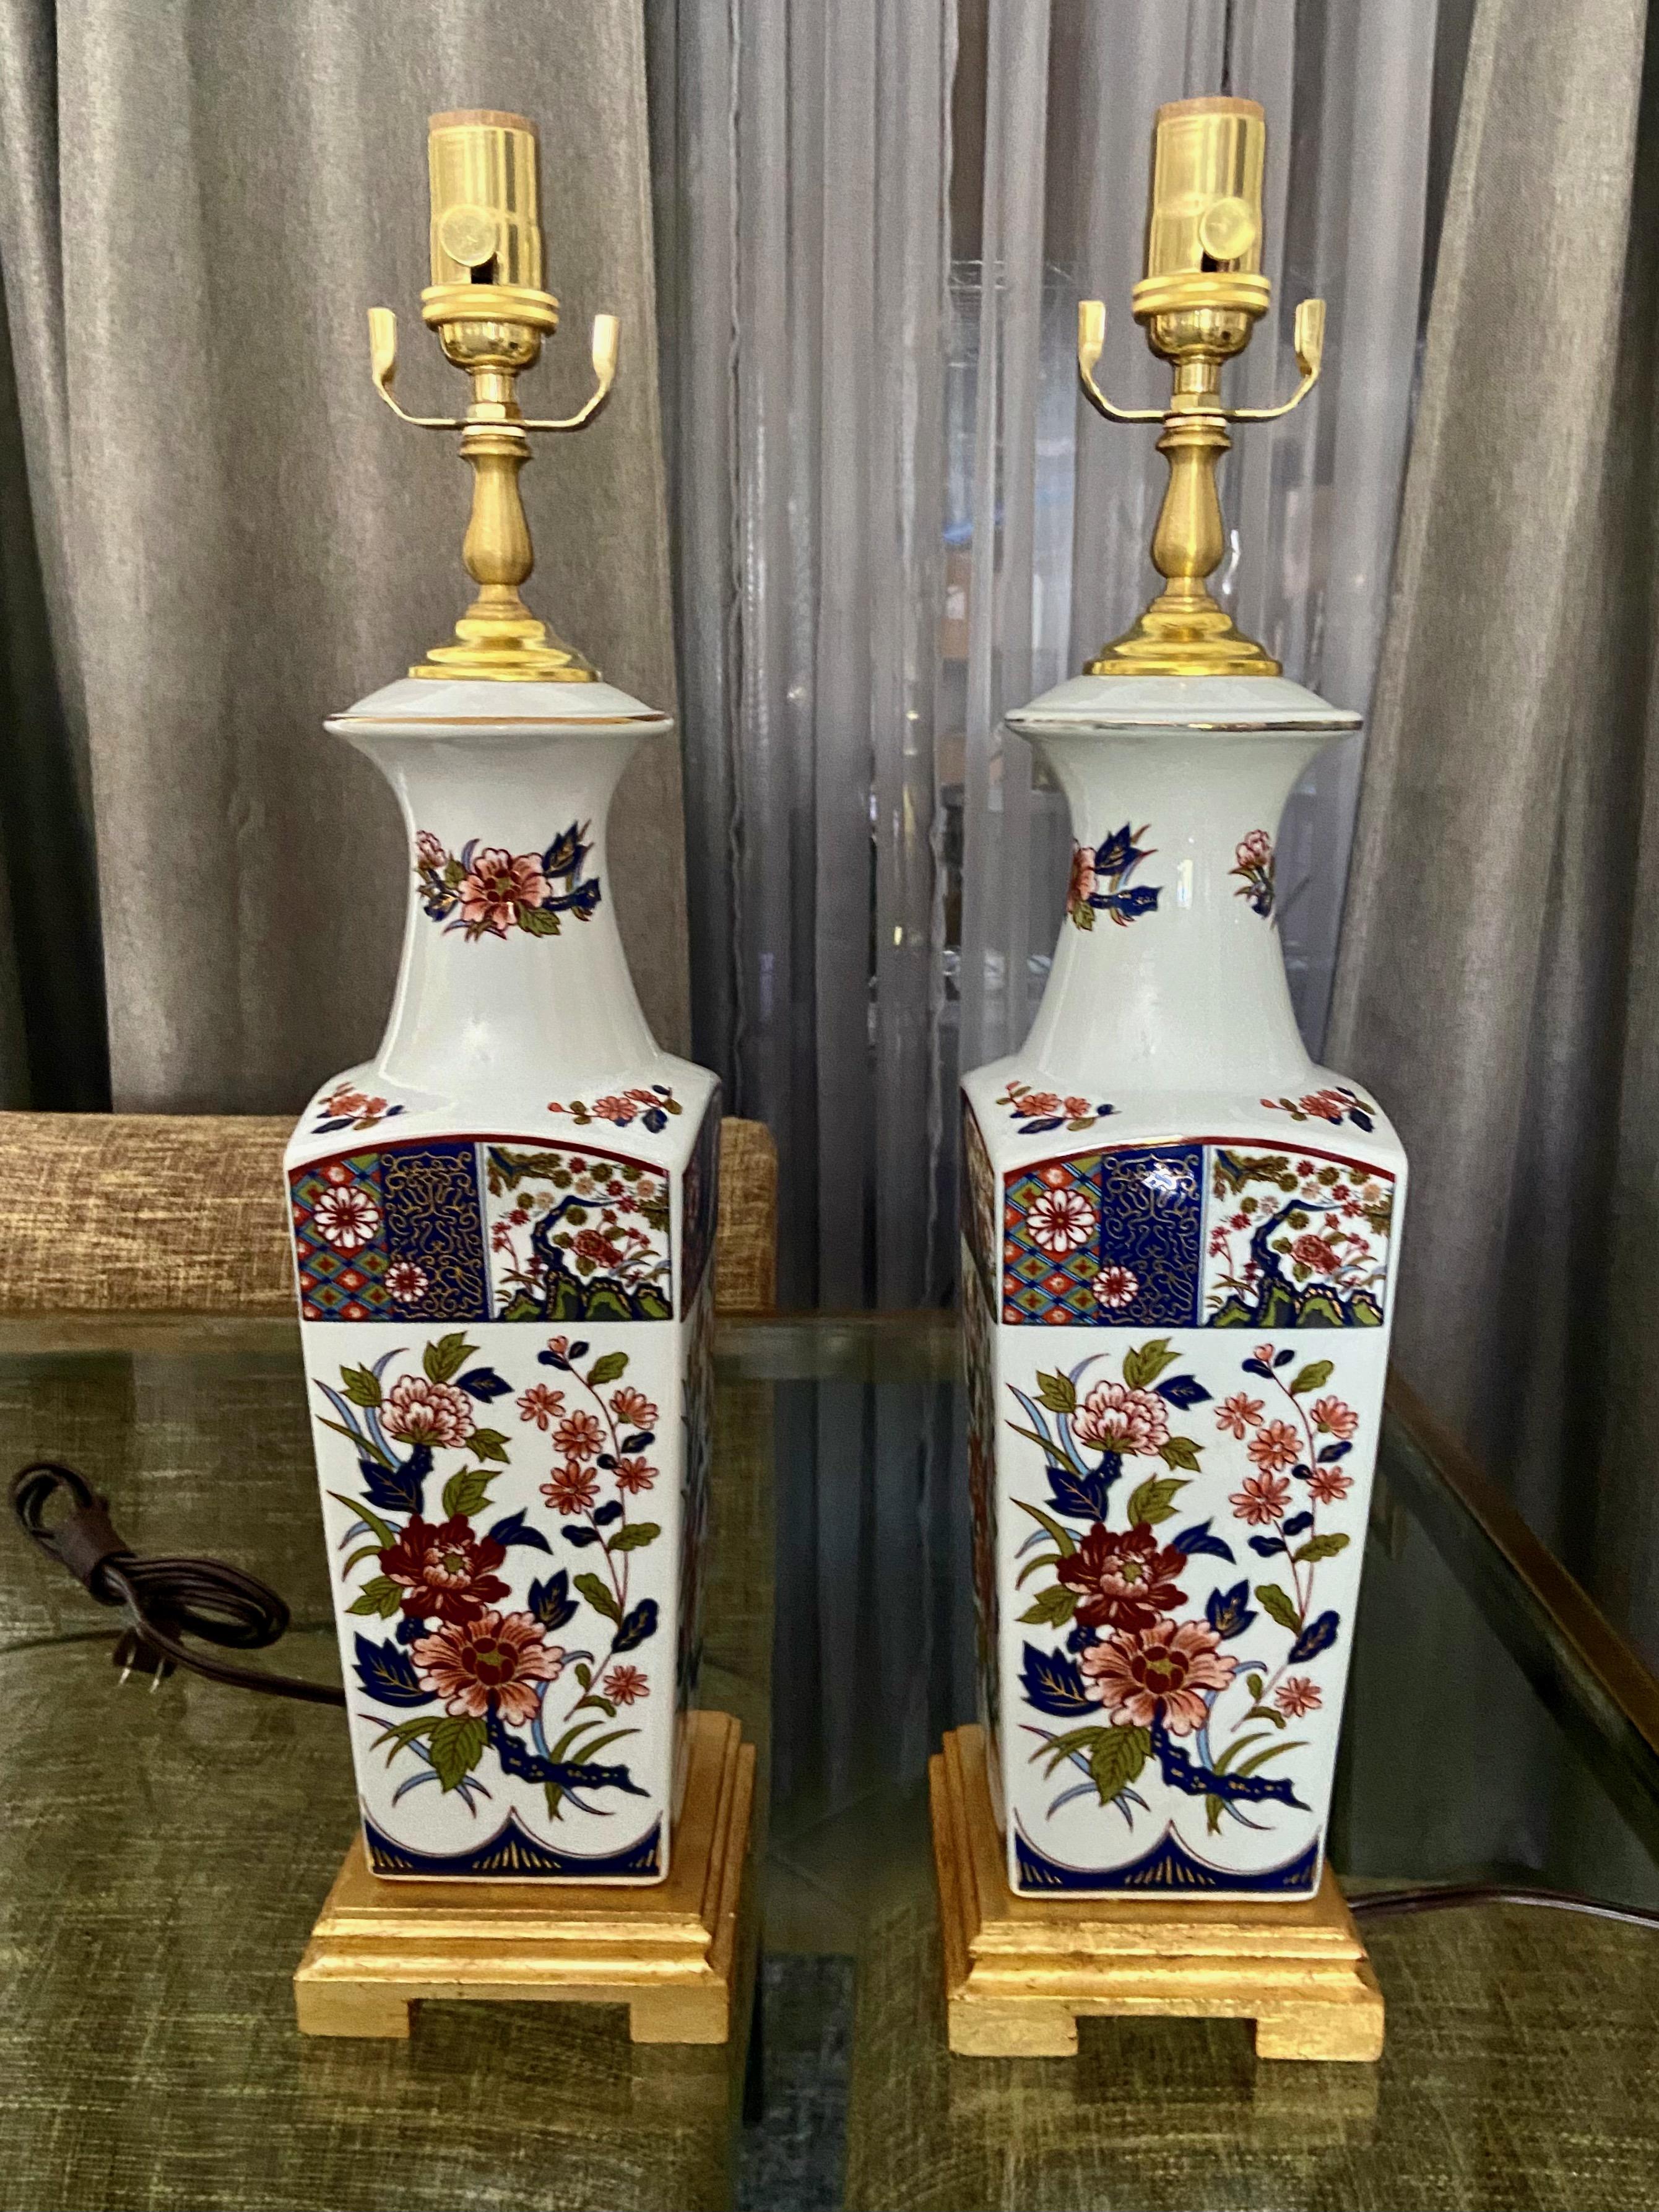 Pair of Japanese Imari porcelain square shape vases mounted on giltwood bases. The colors are a rich red and blue, the design is a classic flower and leaf motif.  Newly wired with new brass 3 way brass sockets, brass fittings and cords. 
Vase